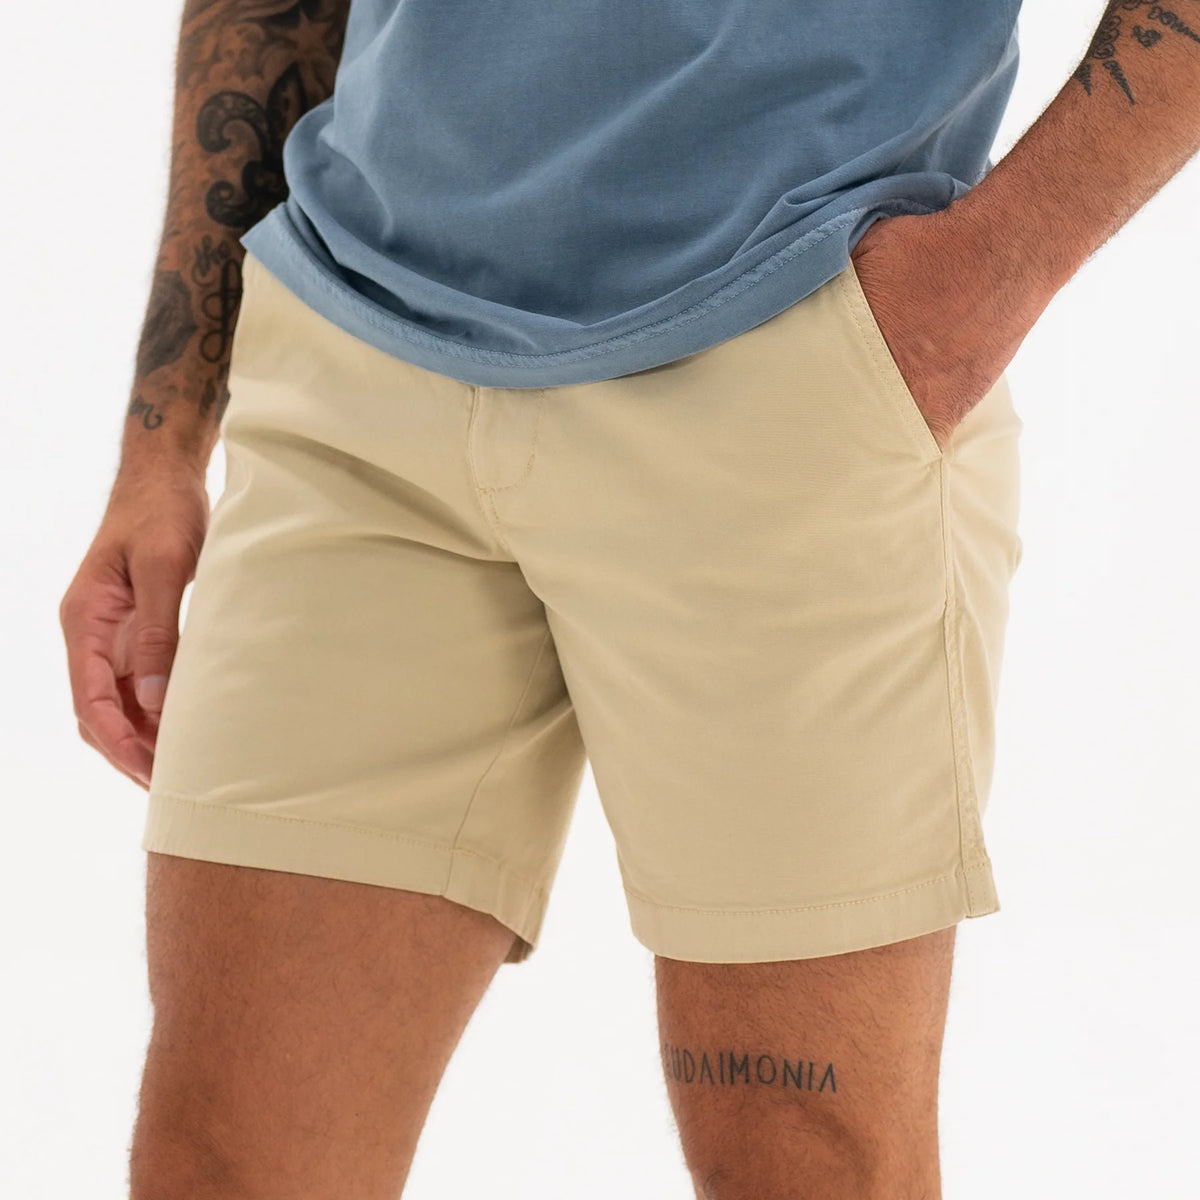 Stretch Short (54%OFF + FREE SHIPPING, END TONIGHT)